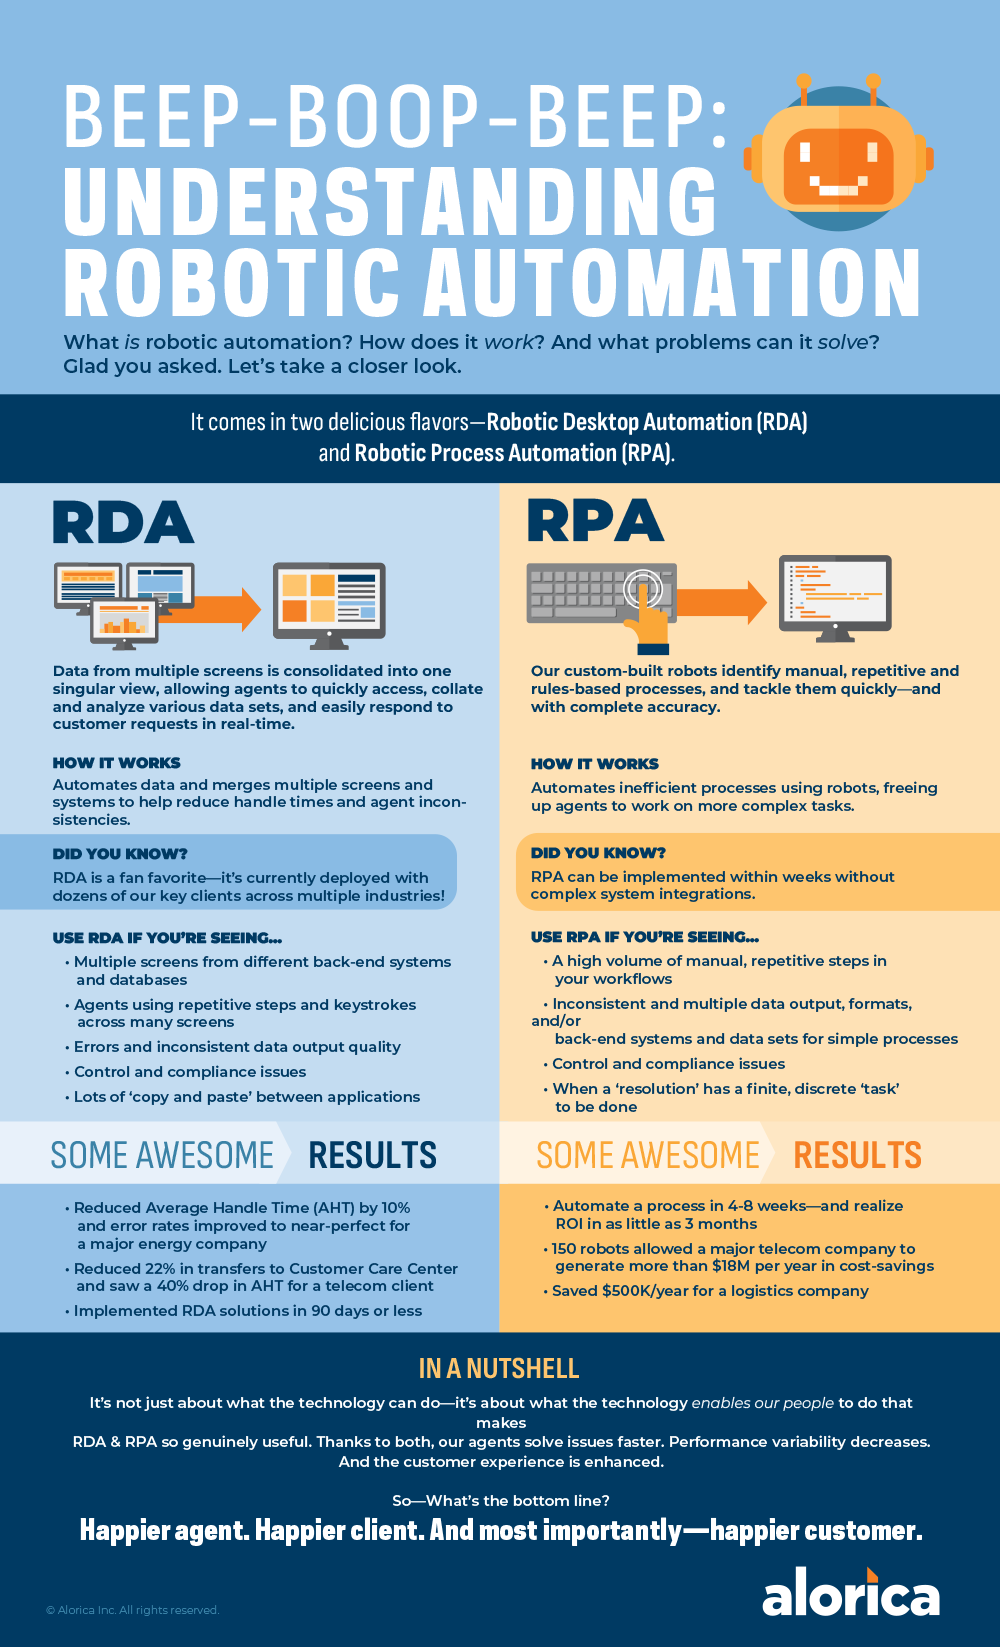 Learn more about what RDA and RPA can do for your business.